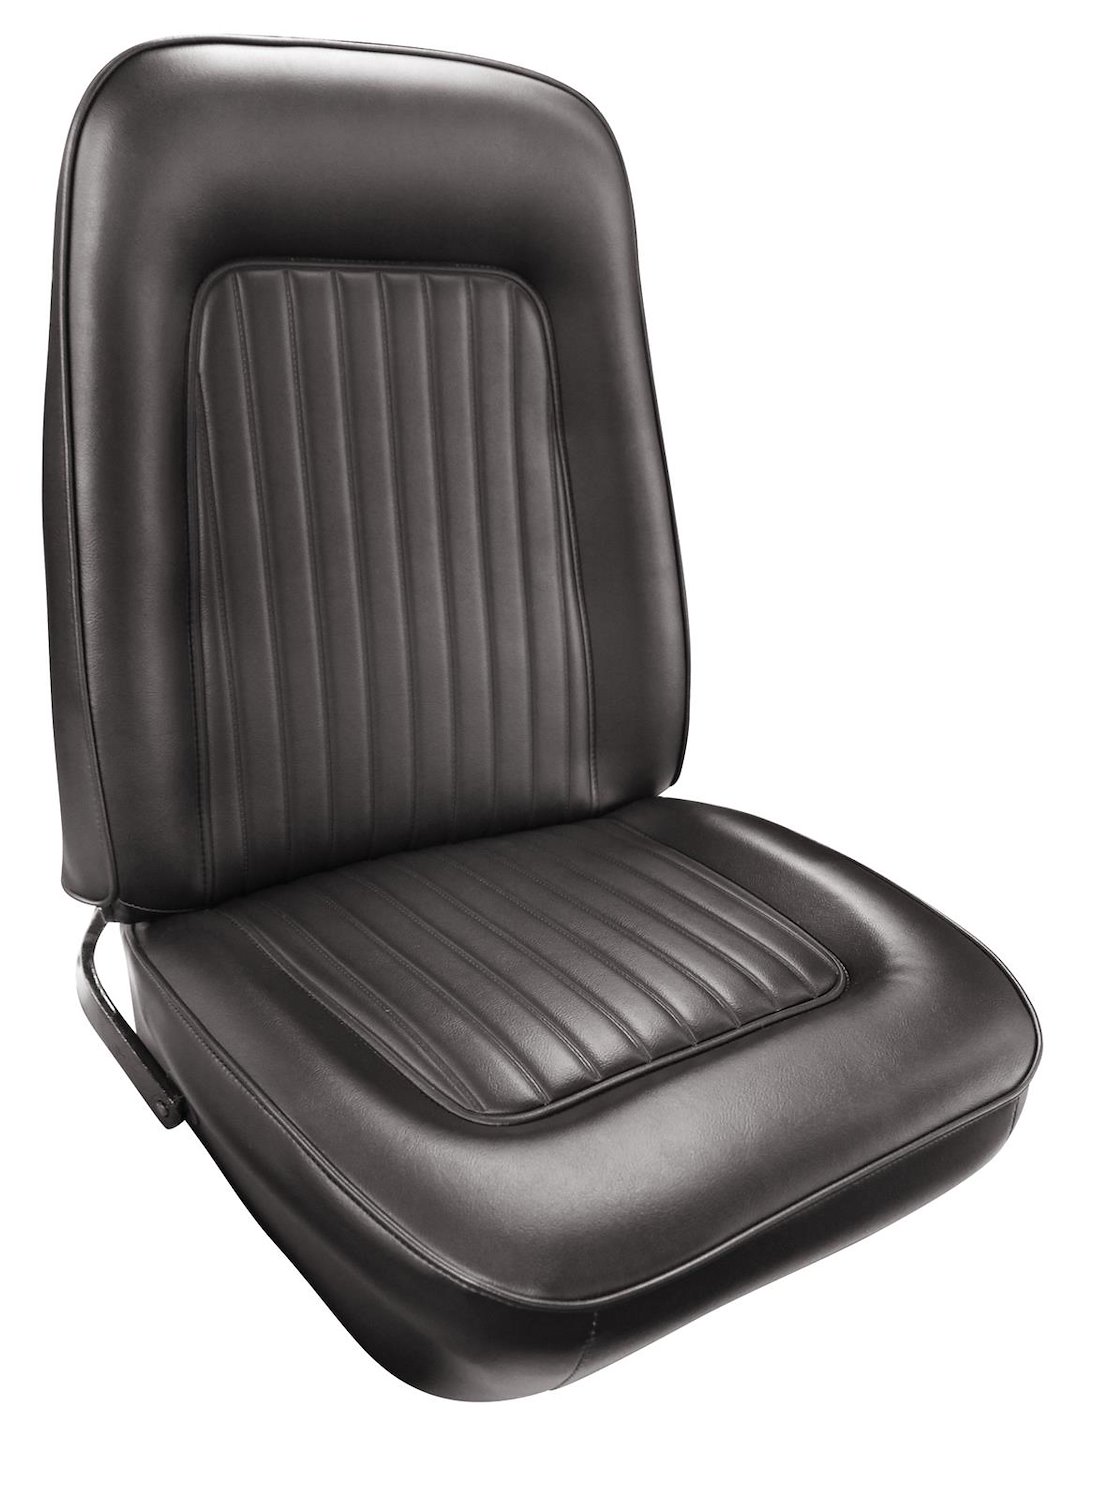 1968 Chevrolet Camaro Deluxe Houndstooth Interior Touring Front Bucket Seat Upholstery Set.